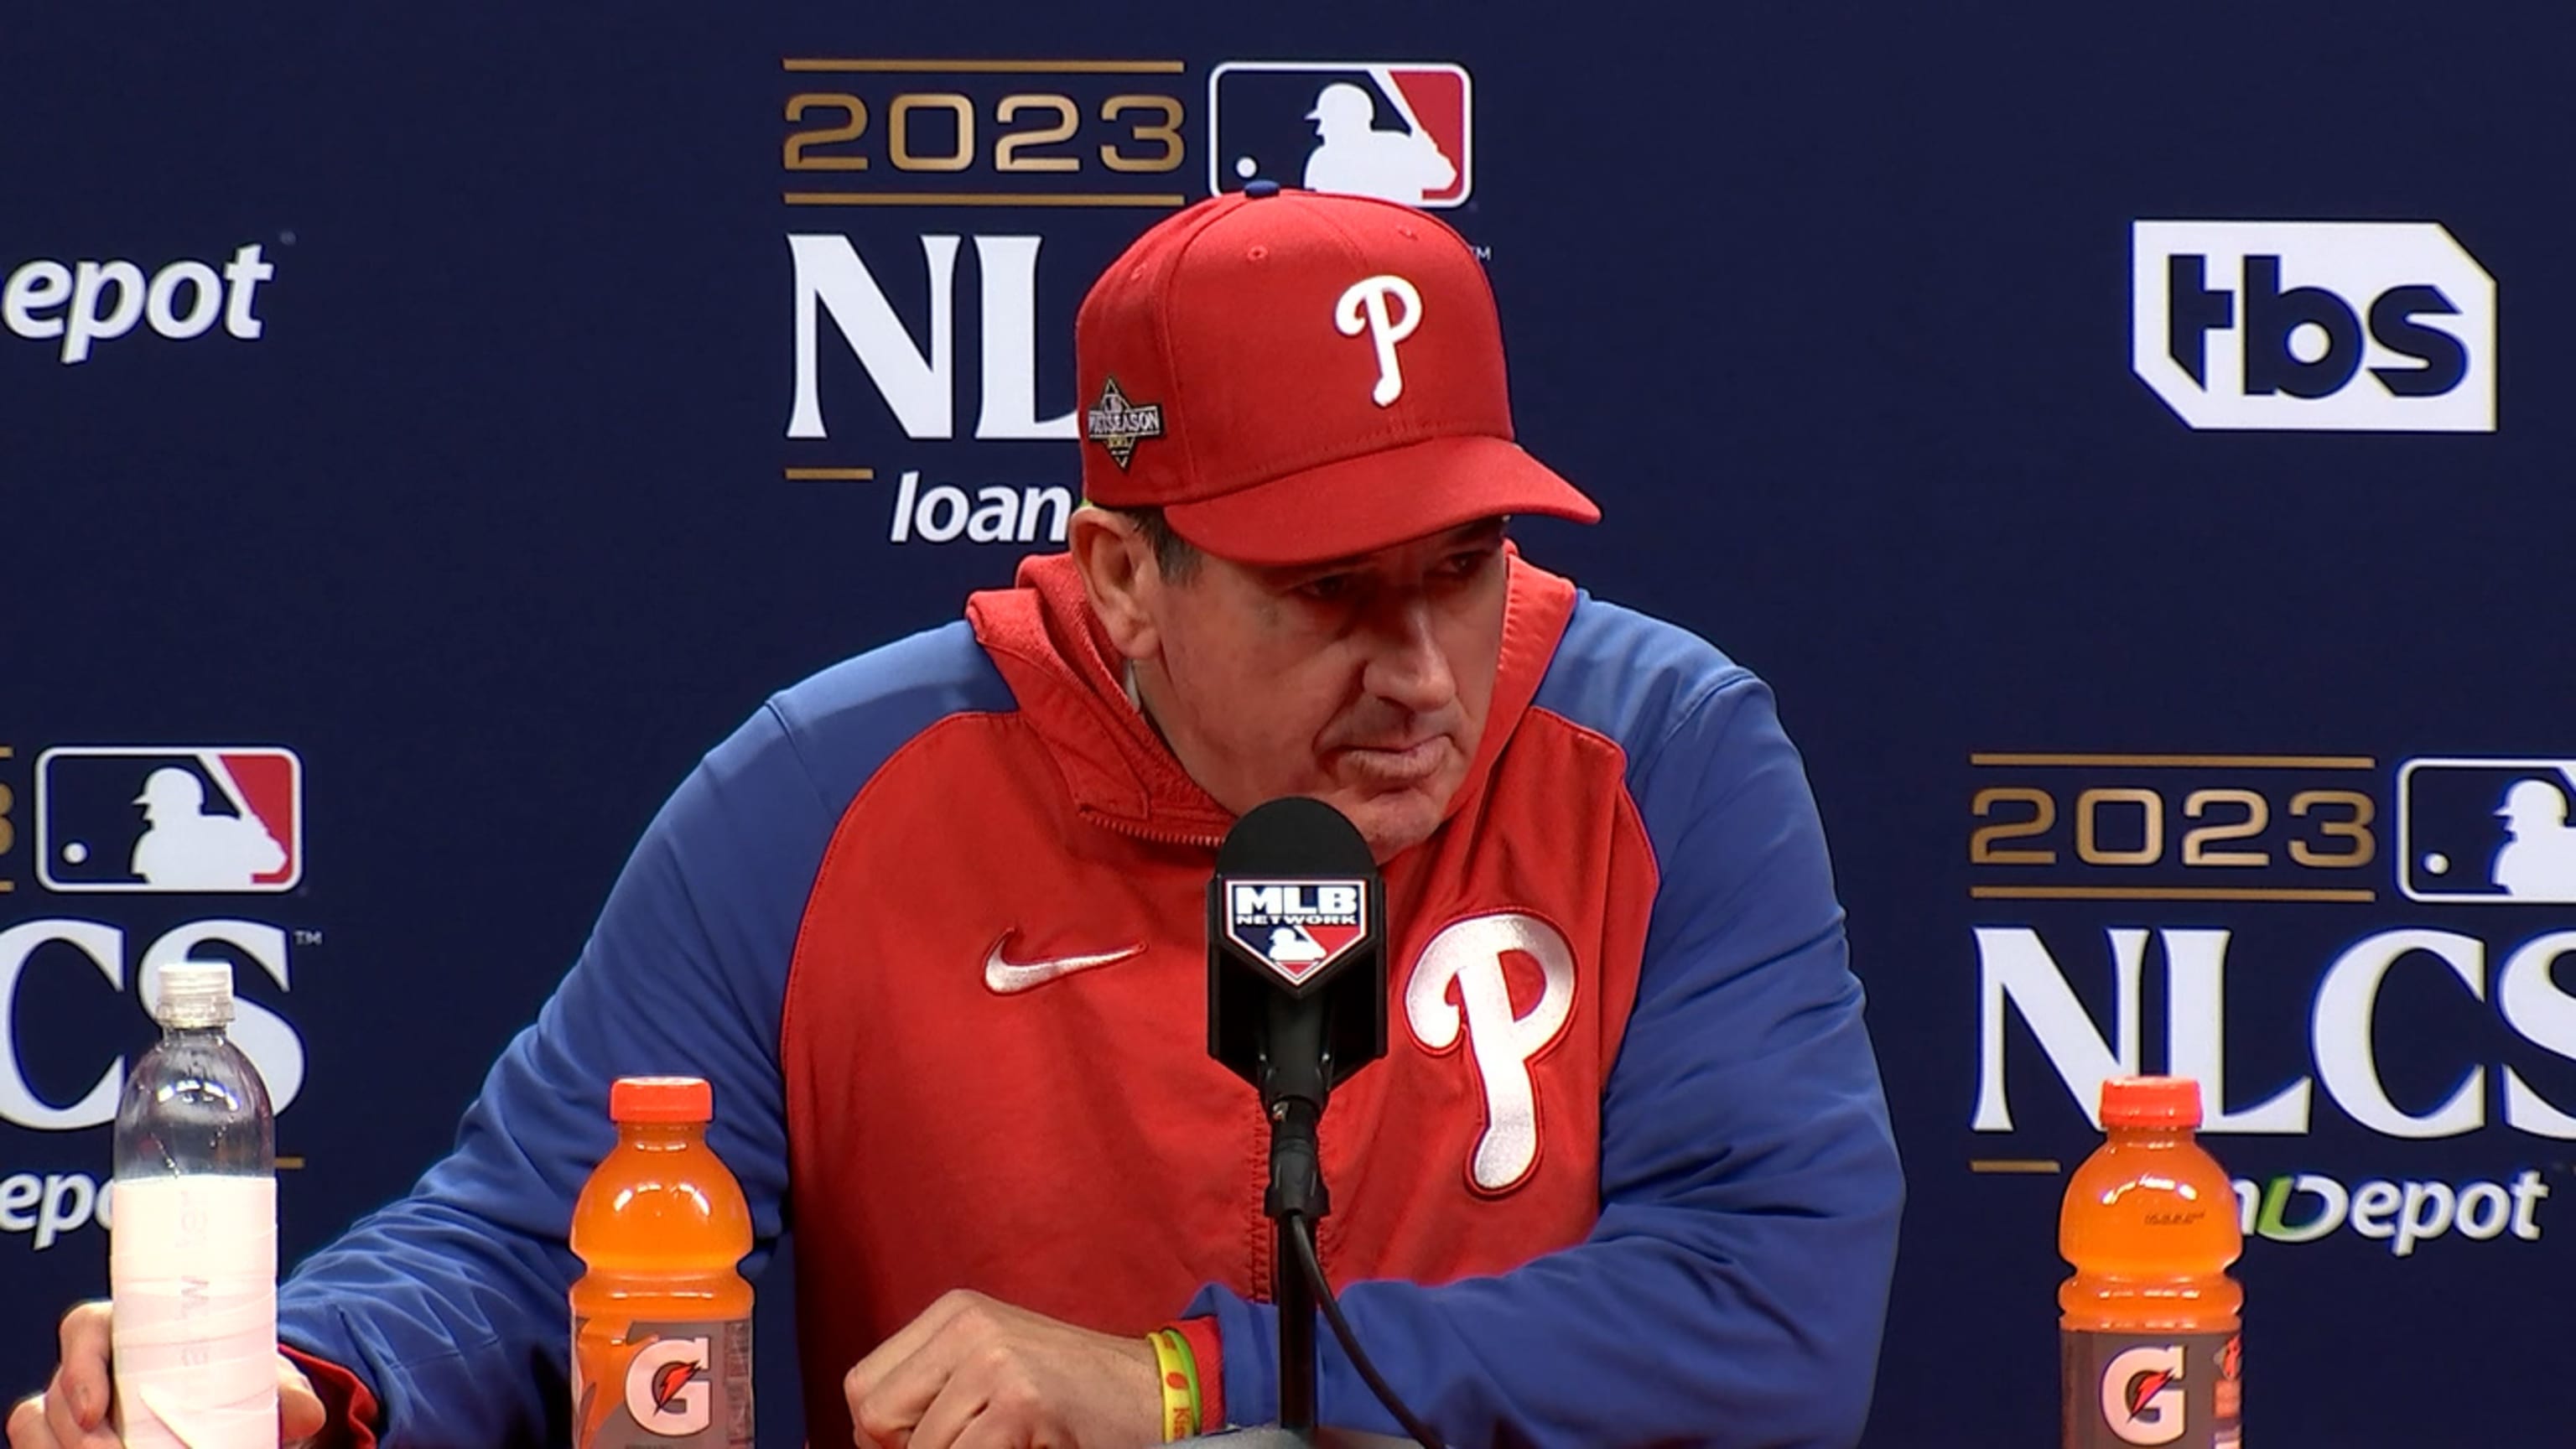 2022 season preview: Analyzing the Phillies' strengths - The Good Phight